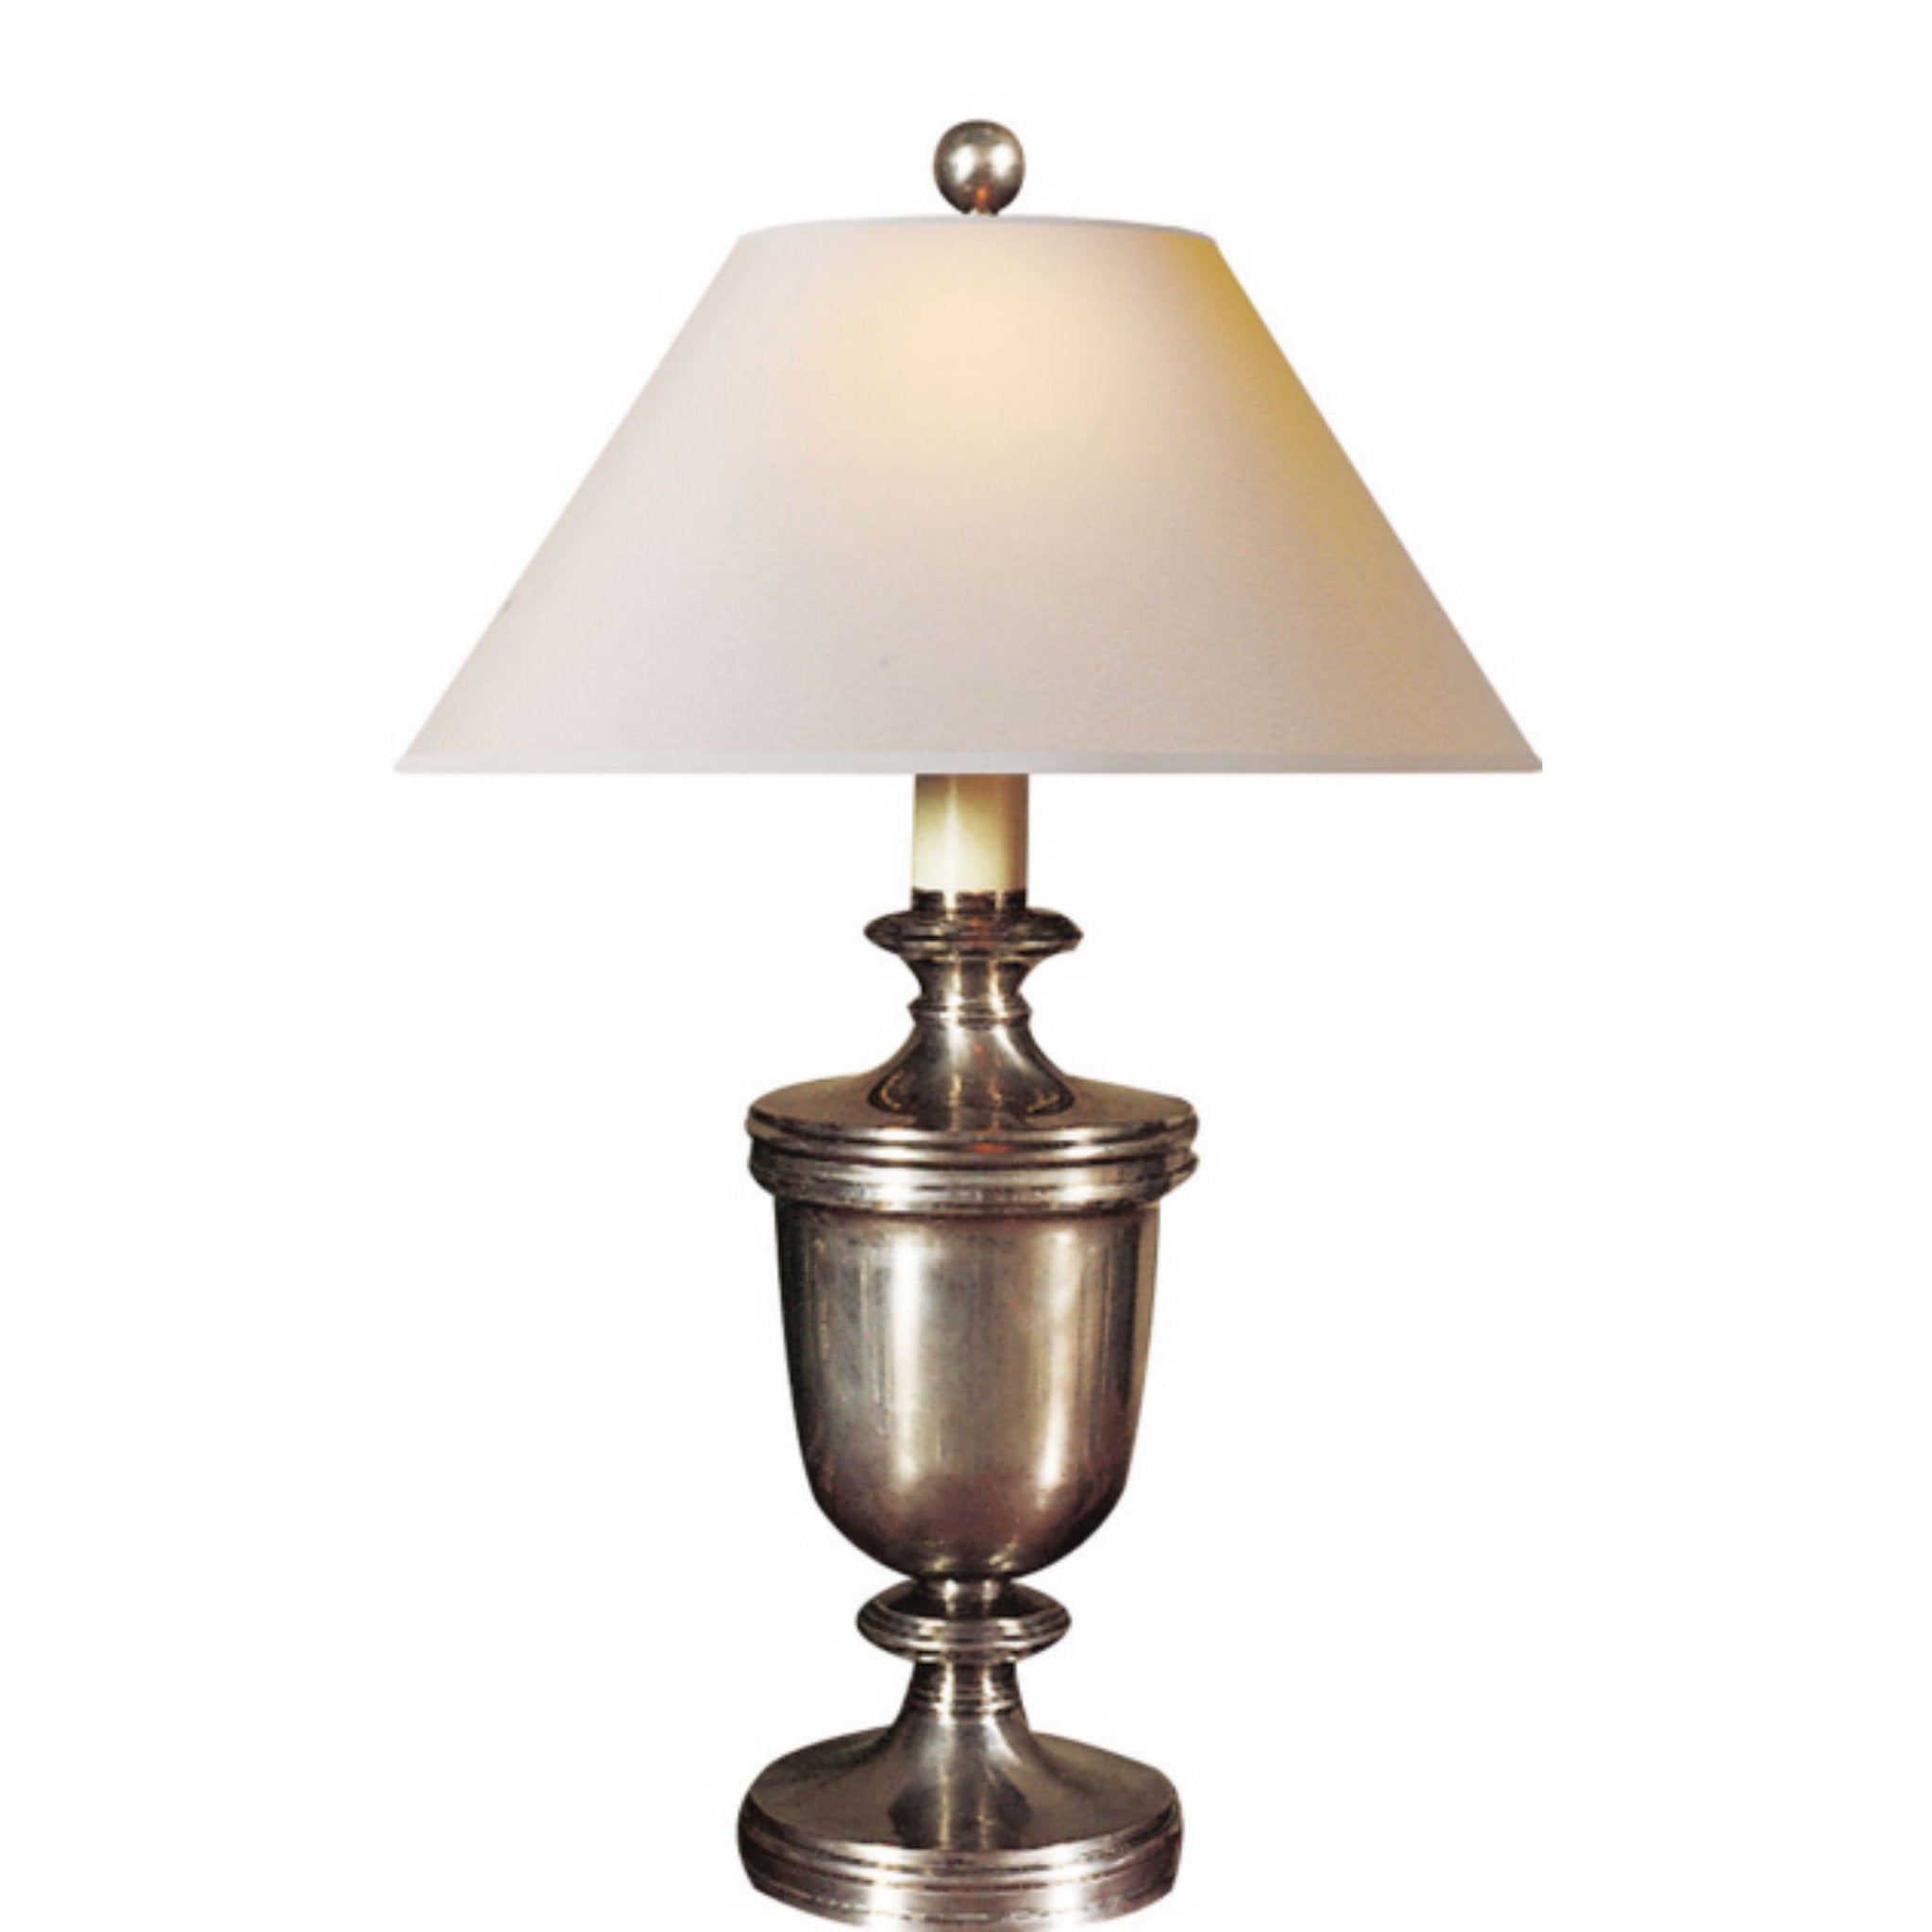 Chapman & Myers Classical Urn Form Medium Table Lamp in Antique Nickel with Natural Paper Shade